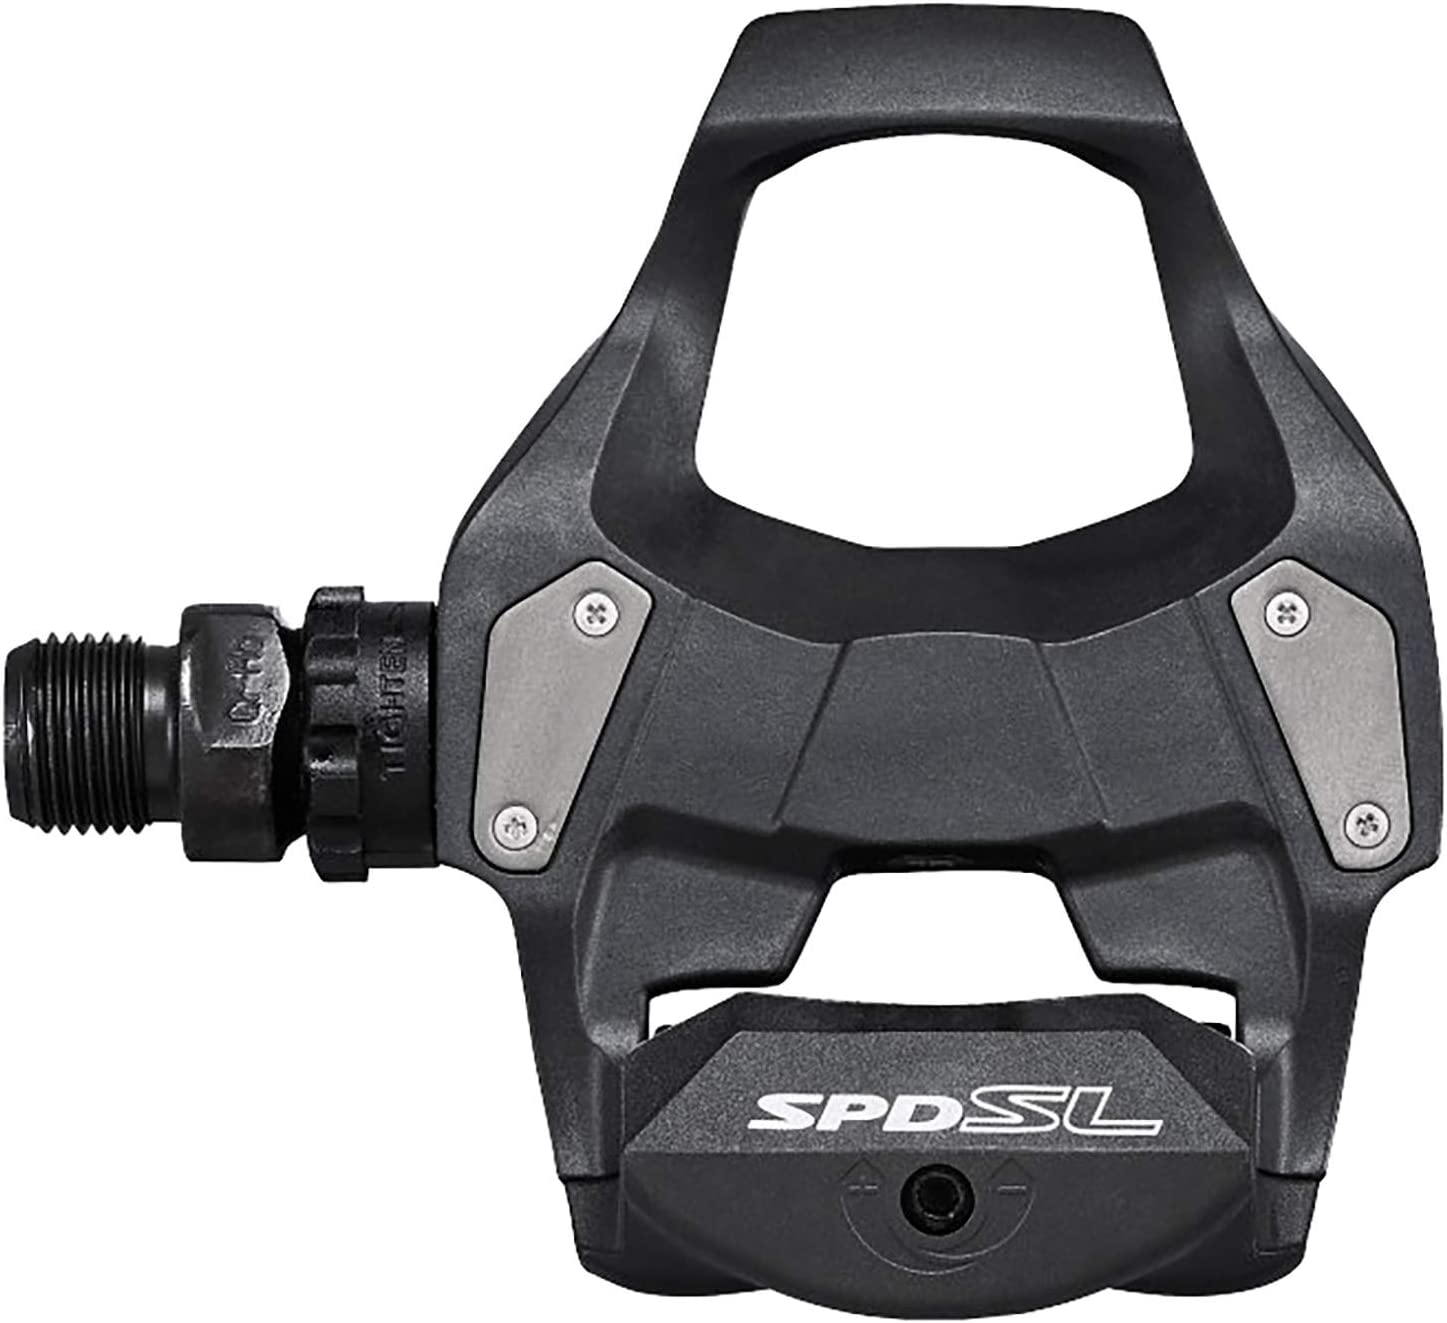 Shimano SPD-SL cleats have a larger platform and are preferred for road cycling.  